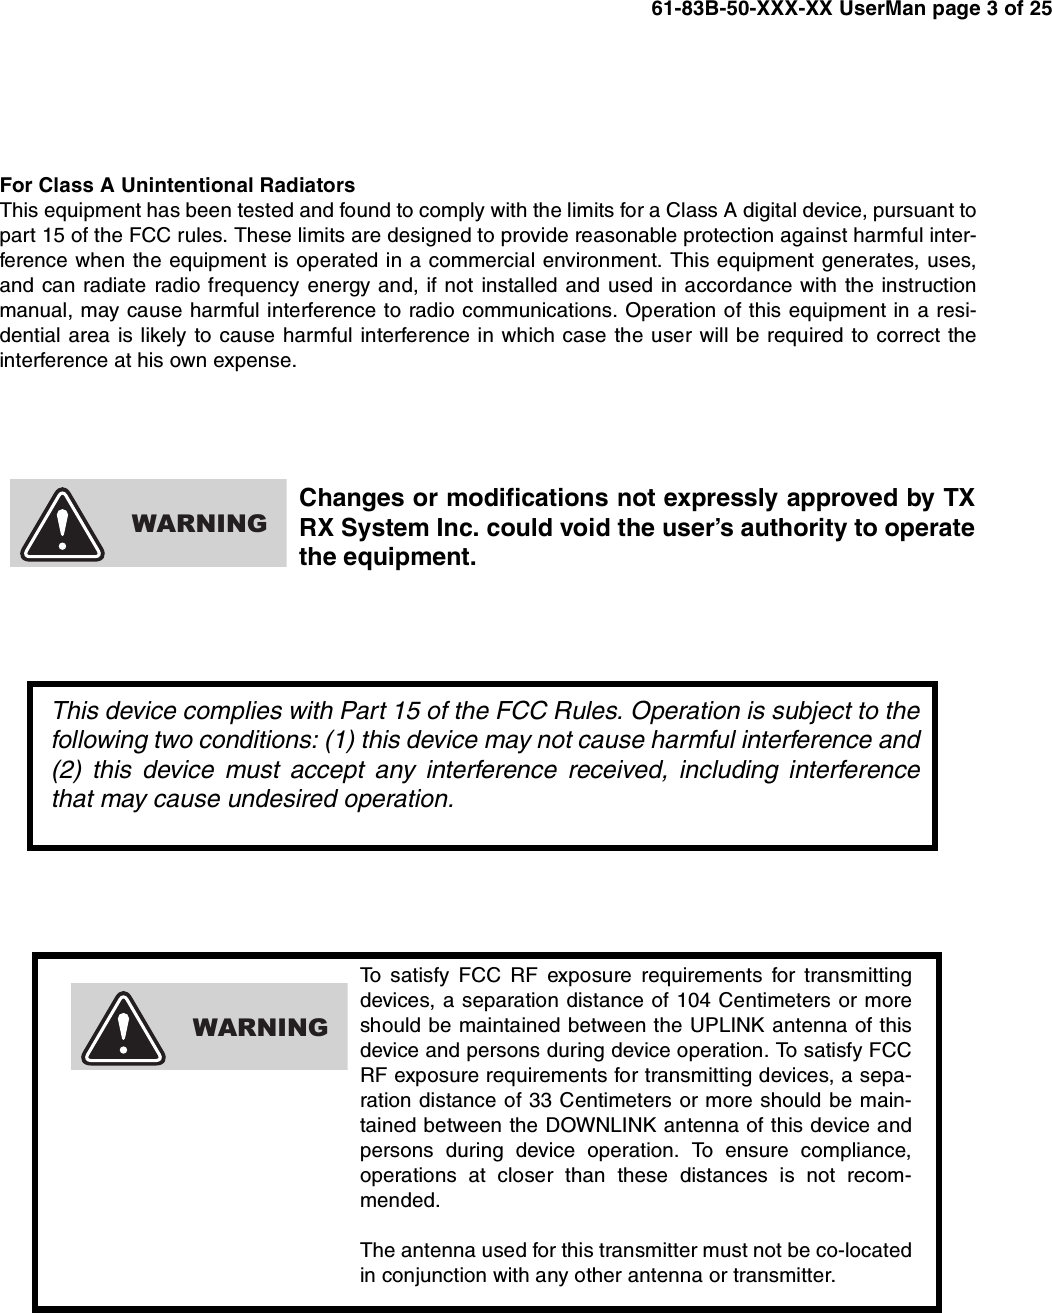 61-83B-50-XXX-XX UserMan page 3 of 25To satisfy FCC RF exposure requirements for transmittingdevices, a separation distance of 104 Centimeters or moreshould be maintained between the UPLINK antenna of thisdevice and persons during device operation. To satisfy FCCRF exposure requirements for transmitting devices, a sepa-ration distance of 33 Centimeters or more should be main-tained between the DOWNLINK antenna of this device andpersons during device operation. To ensure compliance,operations at closer than these distances is not recom-mended.The antenna used for this transmitter must not be co-locatedin conjunction with any other antenna or transmitter.WARNINGFor Class A Unintentional RadiatorsThis equipment has been tested and found to comply with the limits for a Class A digital device, pursuant topart 15 of the FCC rules. These limits are designed to provide reasonable protection against harmful inter-ference when the equipment is operated in a commercial environment. This equipment generates, uses,and can radiate radio frequency energy and, if not installed and used in accordance with the instructionmanual, may cause harmful interference to radio communications. Operation of this equipment in a resi-dential area is likely to cause harmful interference in which case the user will be required to correct theinterference at his own expense.Changes or modifications not expressly approved by TXRX System Inc. could void the user’s authority to operatethe equipment.WARNINGThis device complies with Part 15 of the FCC Rules. Operation is subject to thefollowing two conditions: (1) this device may not cause harmful interference and(2) this device must accept any interference received, including interferencethat may cause undesired operation.